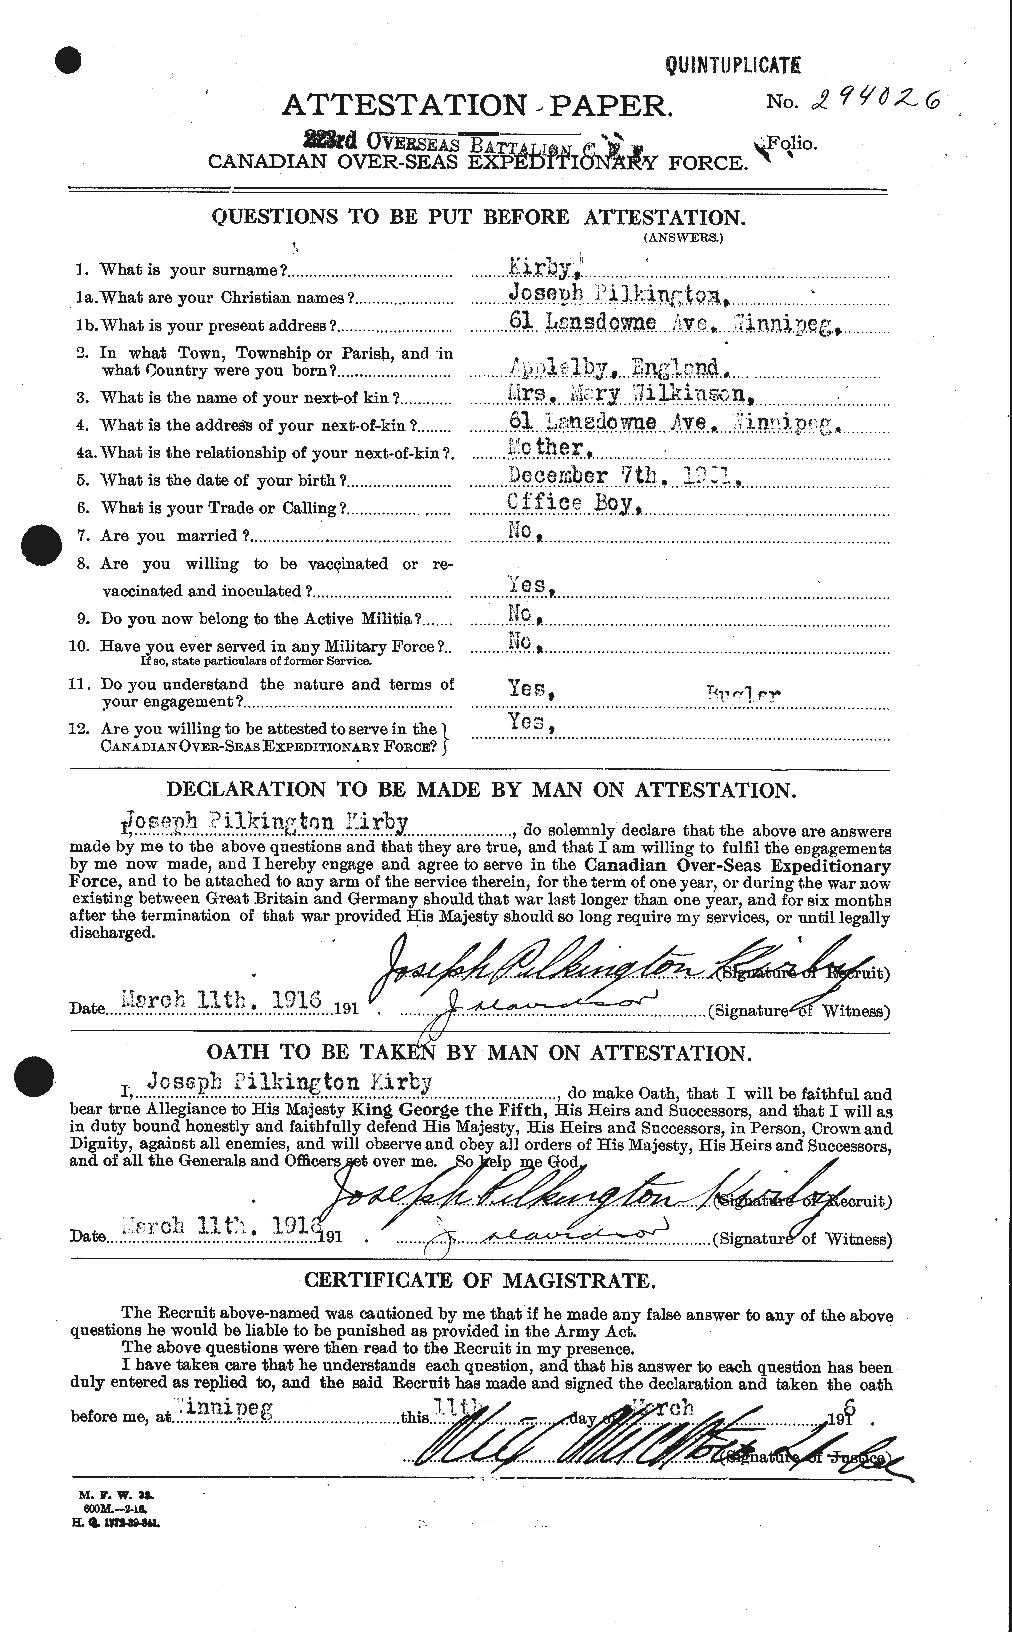 Personnel Records of the First World War - CEF 437241a